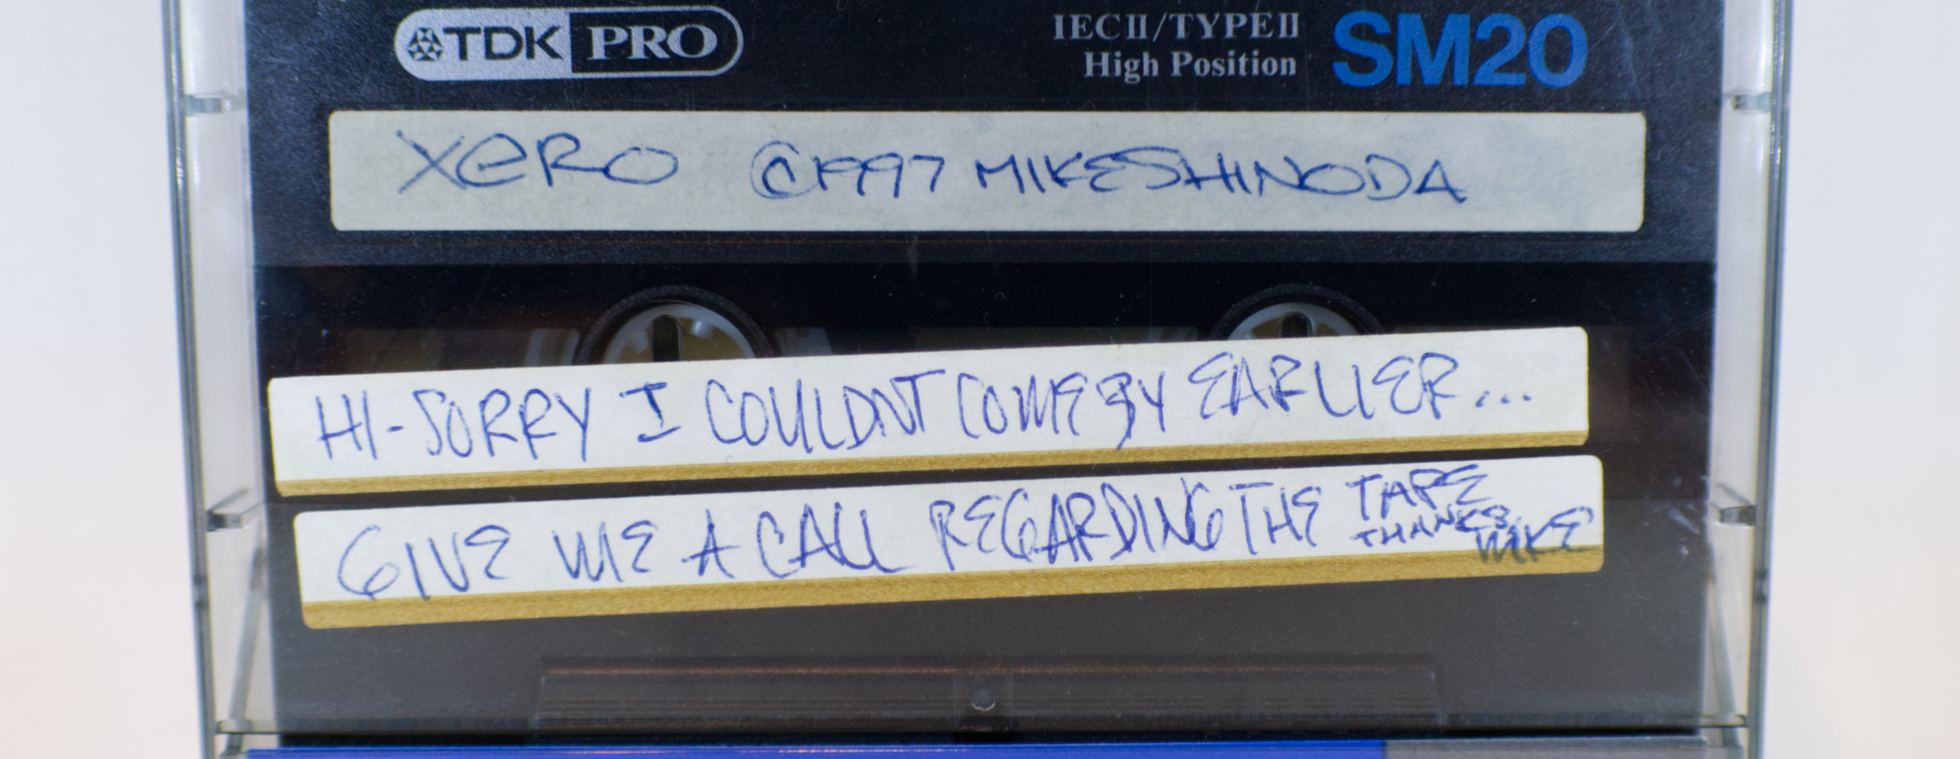 1997 Xero Demo Tape with note from Mike Shinoda